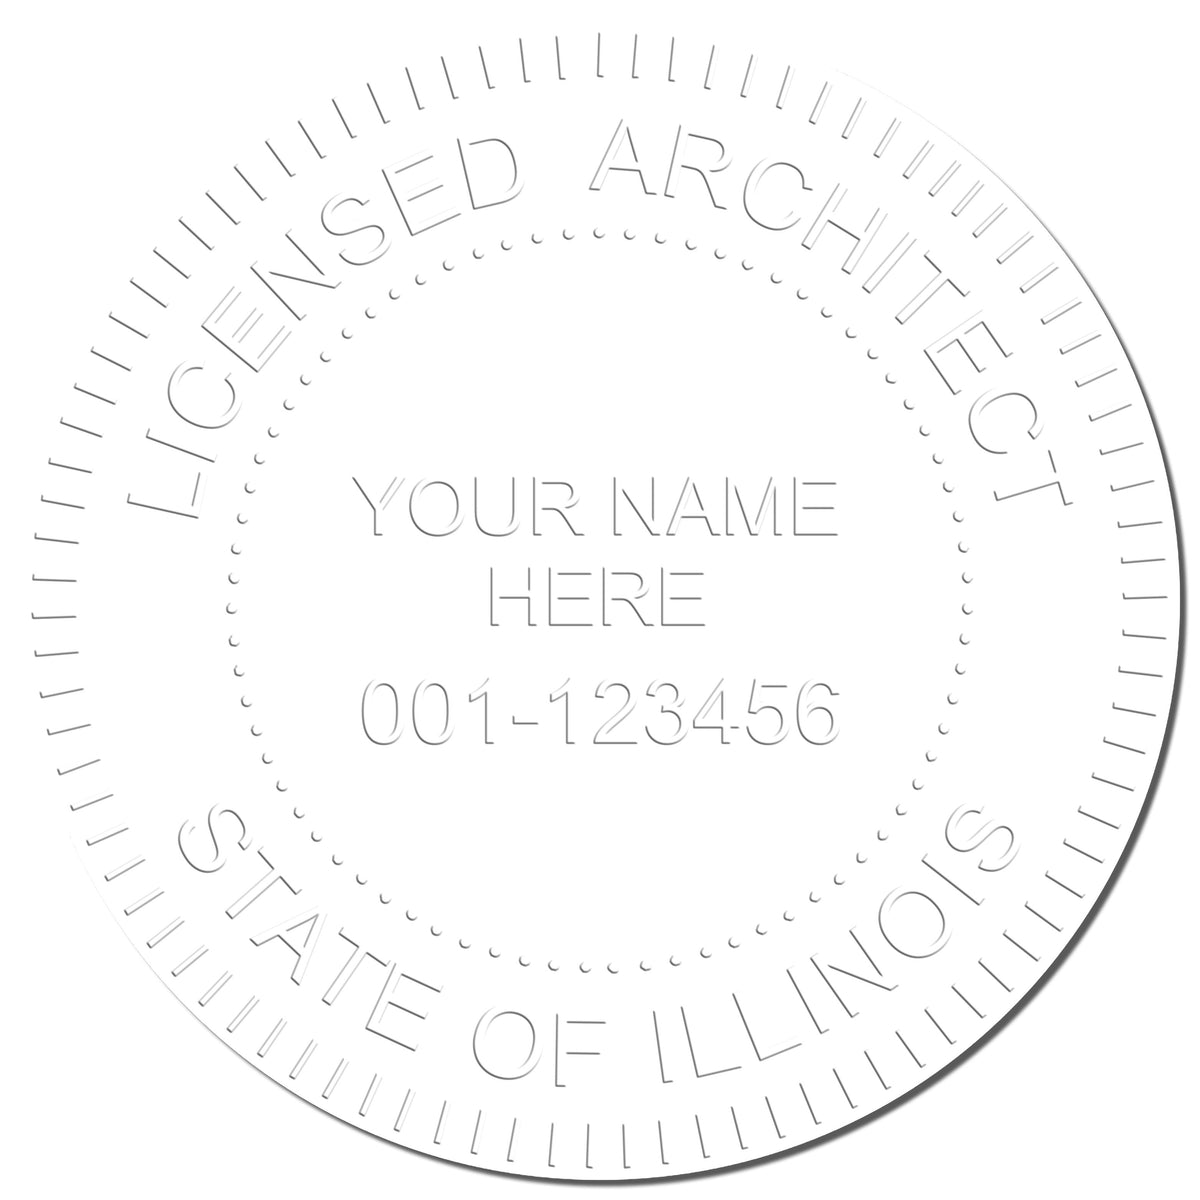 This paper is stamped with a sample imprint of the Gift Illinois Architect Seal, signifying its quality and reliability.